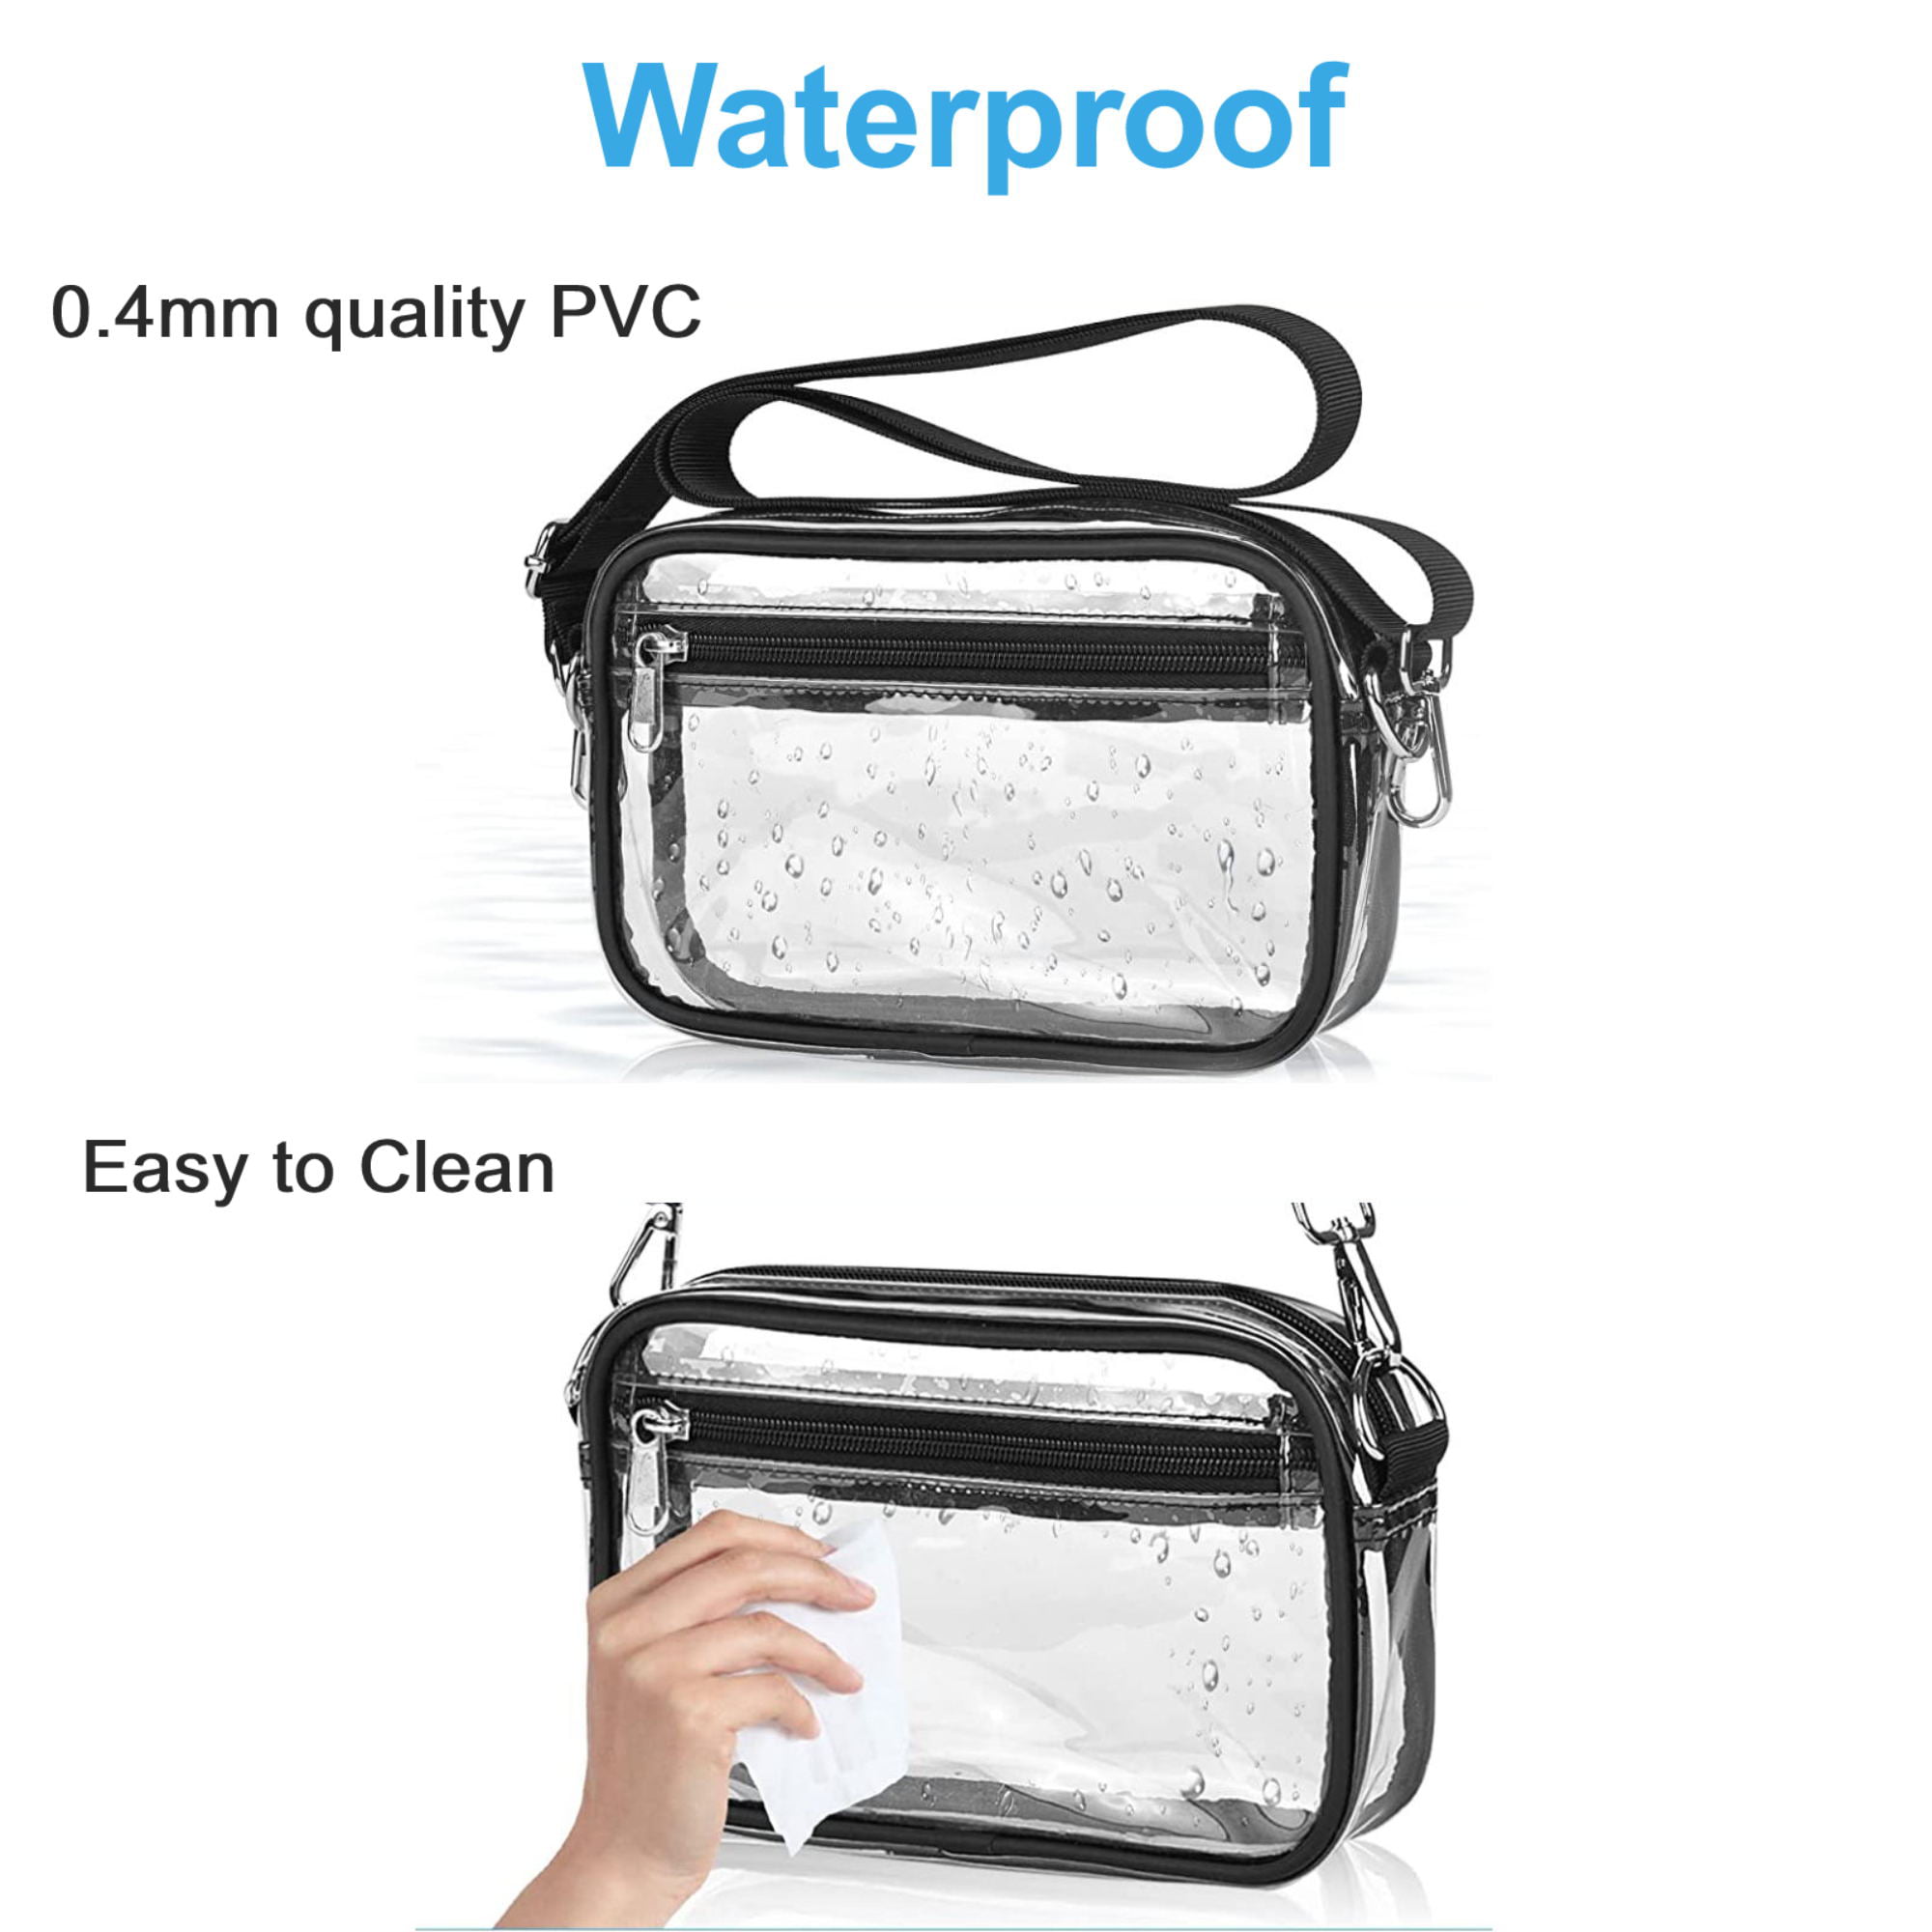 Juoxeepy Clear Bag Stadium Approved Clear Purse Concert Stadium Clear  Crossbody Bag PVC Clear Shoulder Bag Clutch